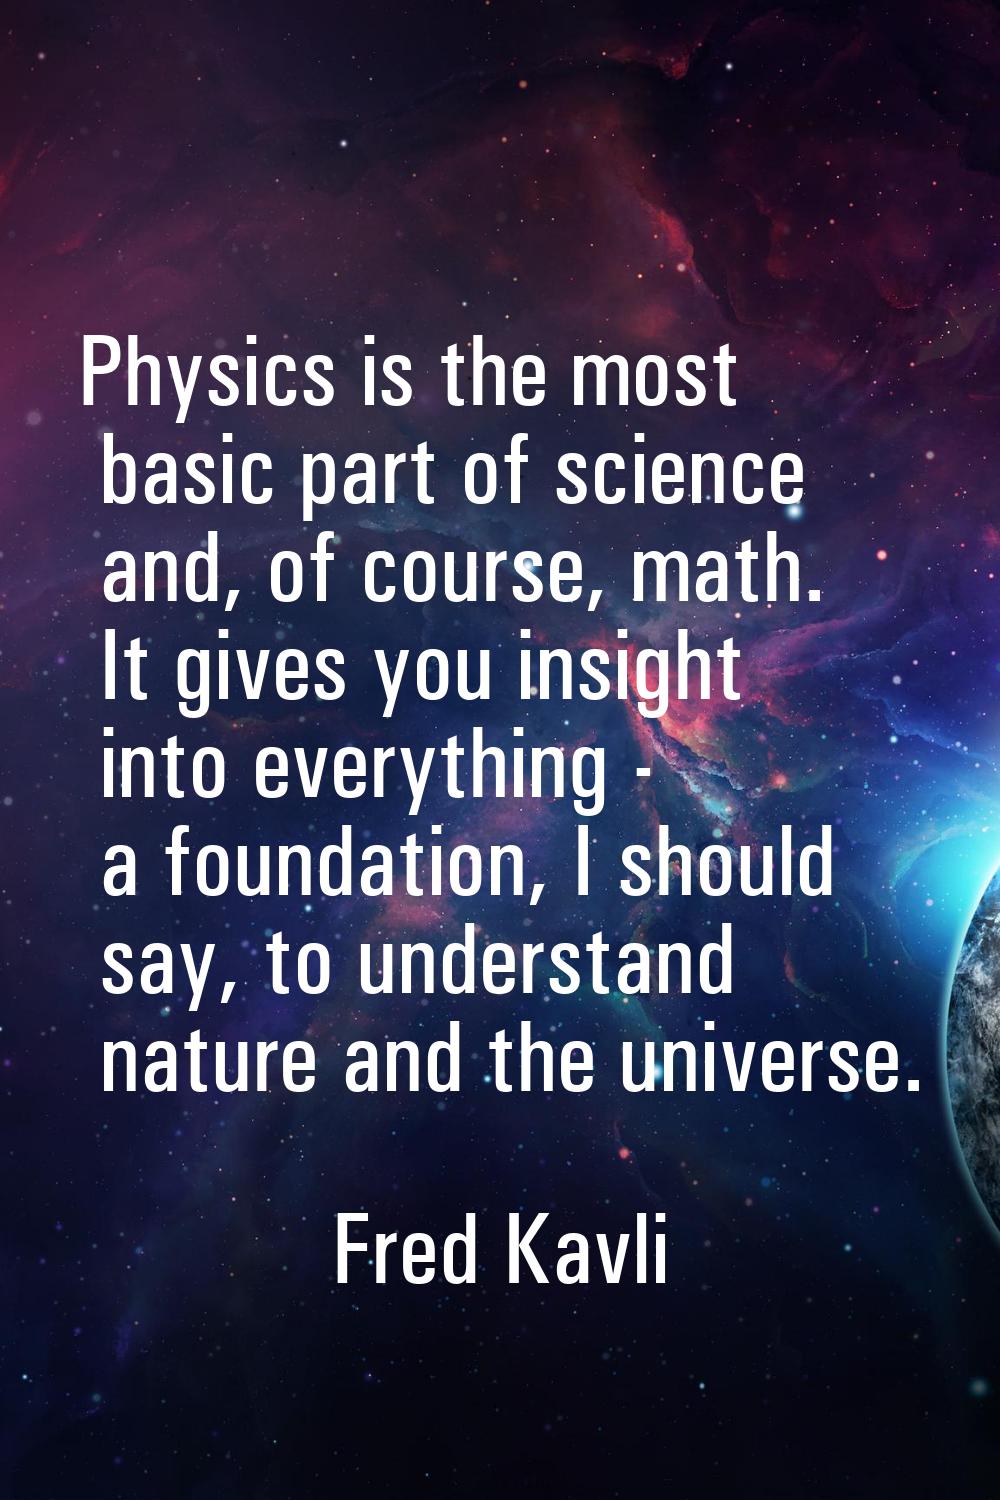 Physics is the most basic part of science and, of course, math. It gives you insight into everythin